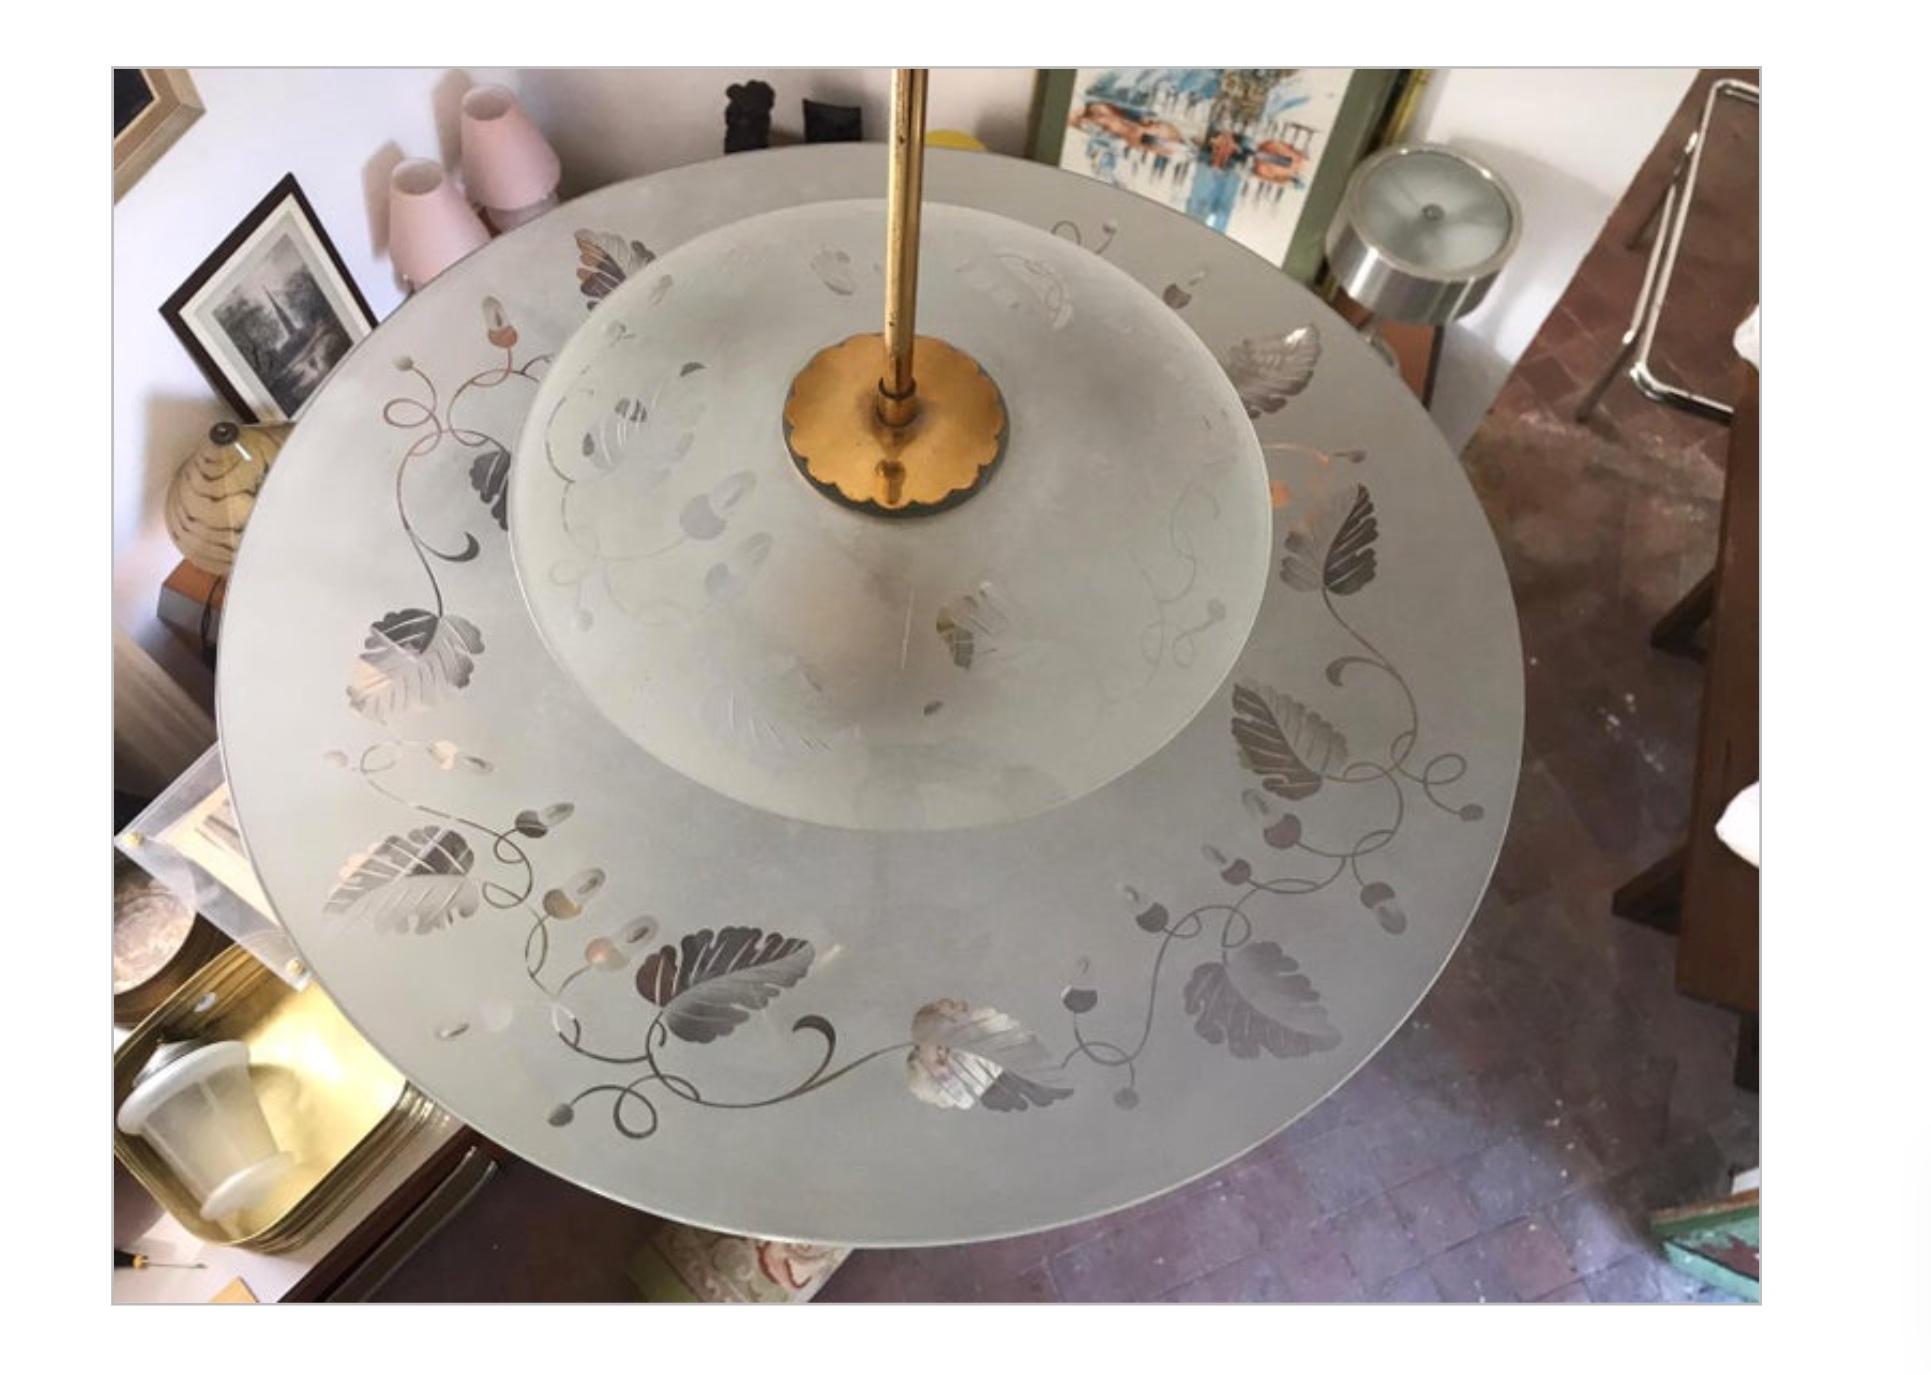 
Stylish Italian Mid-Century Modern large disc chandelier or pendant lamp by Pietro Chiesa for Fontana Arte manufacturer, 1940s. This piece is made of polished brass, frosted and chiselled glass with three lights.
The line is simple but really